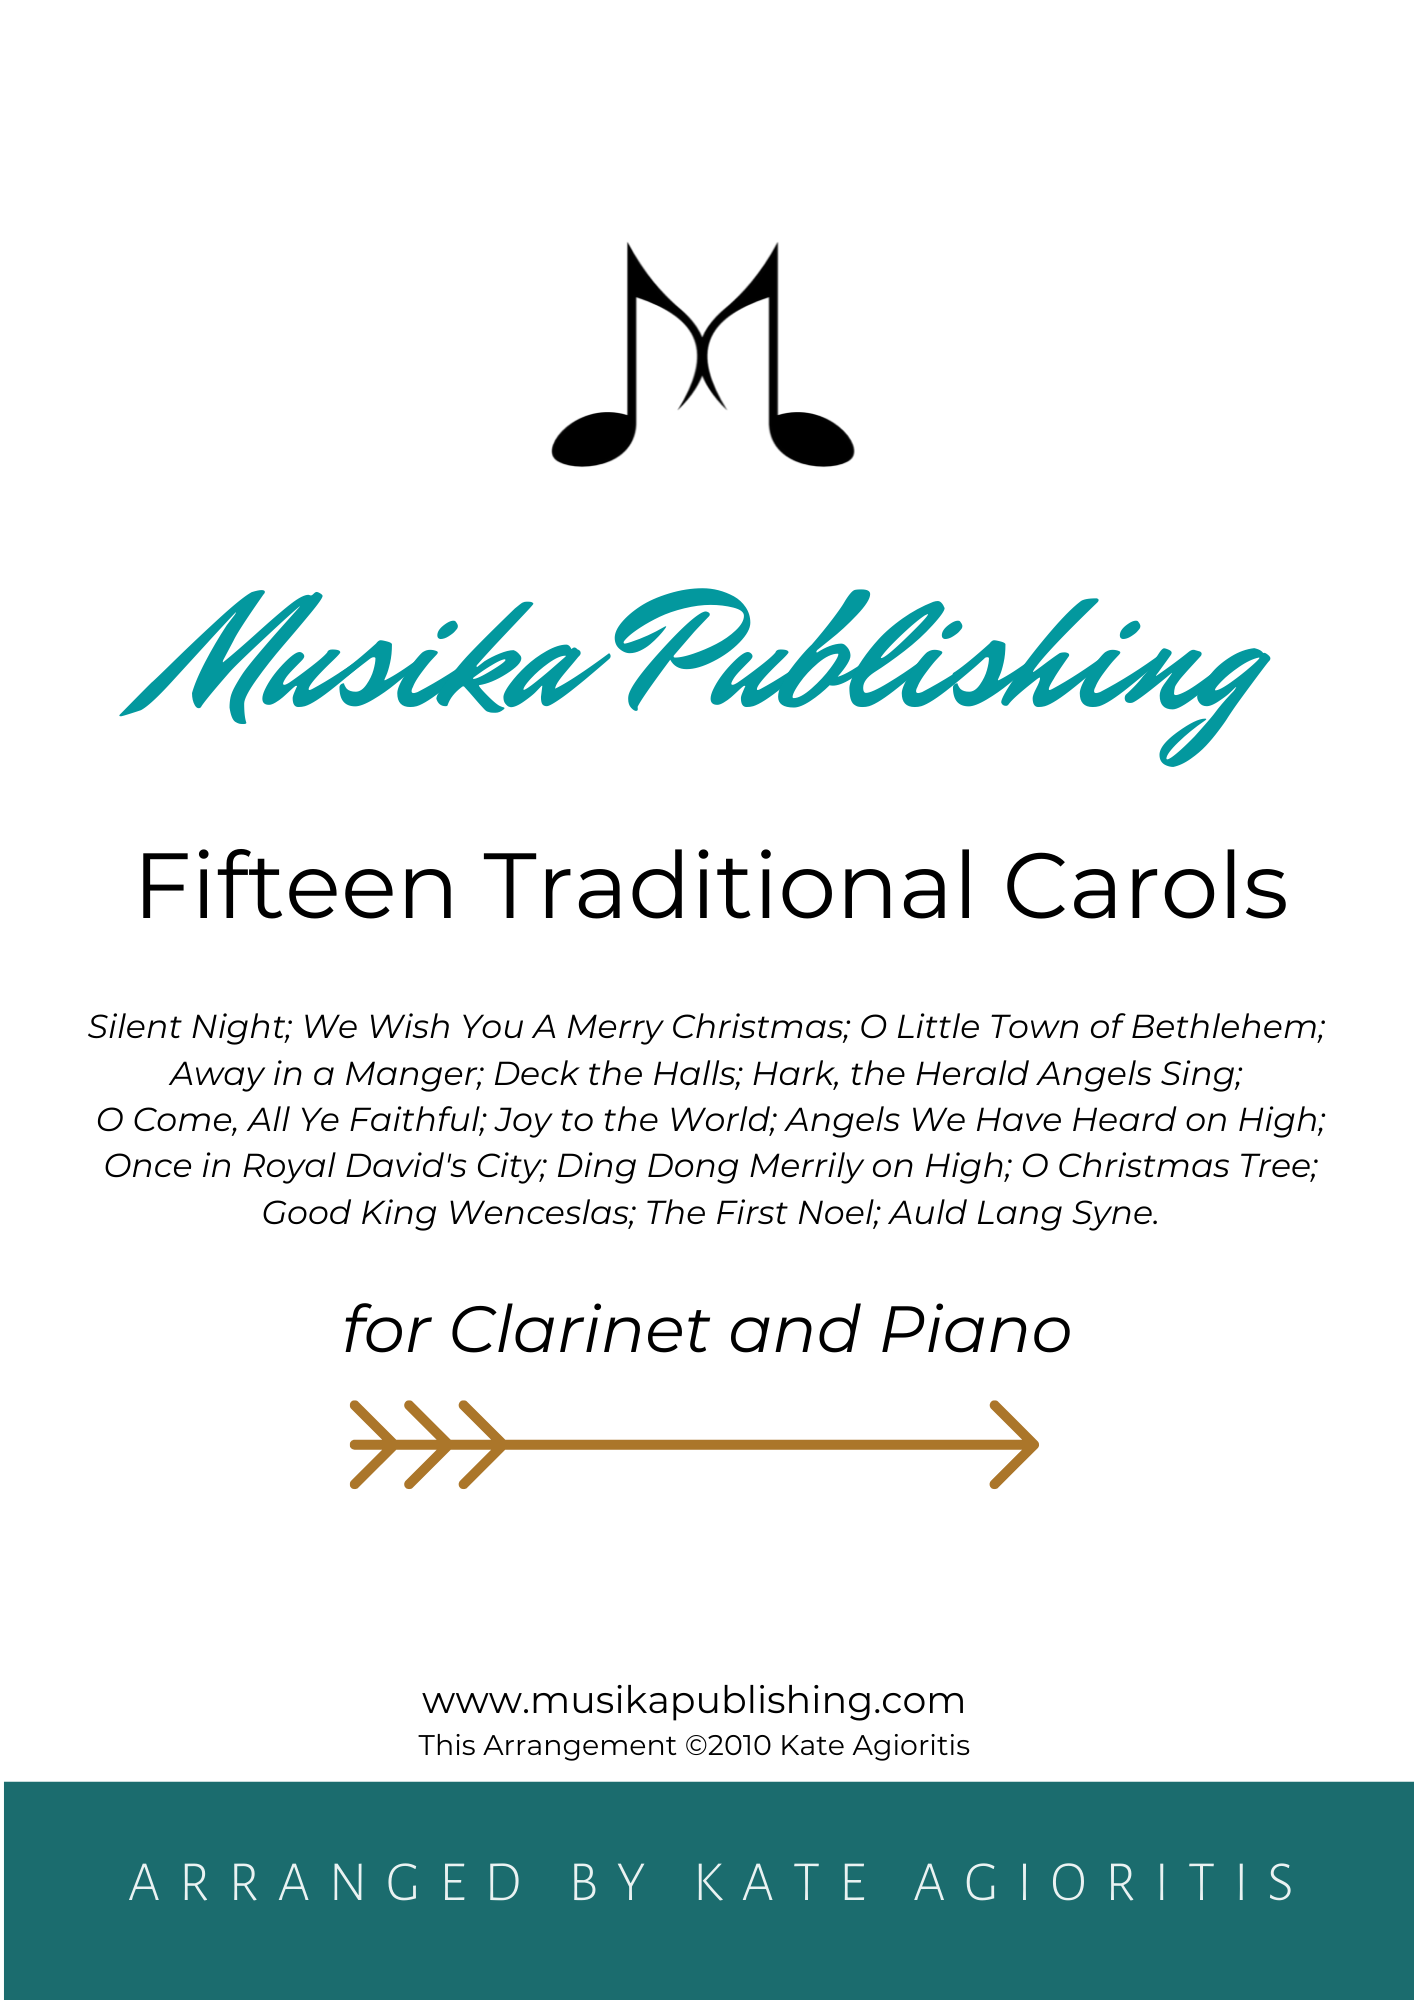 Fifteen Traditional Carols - for Clarinet and Piano